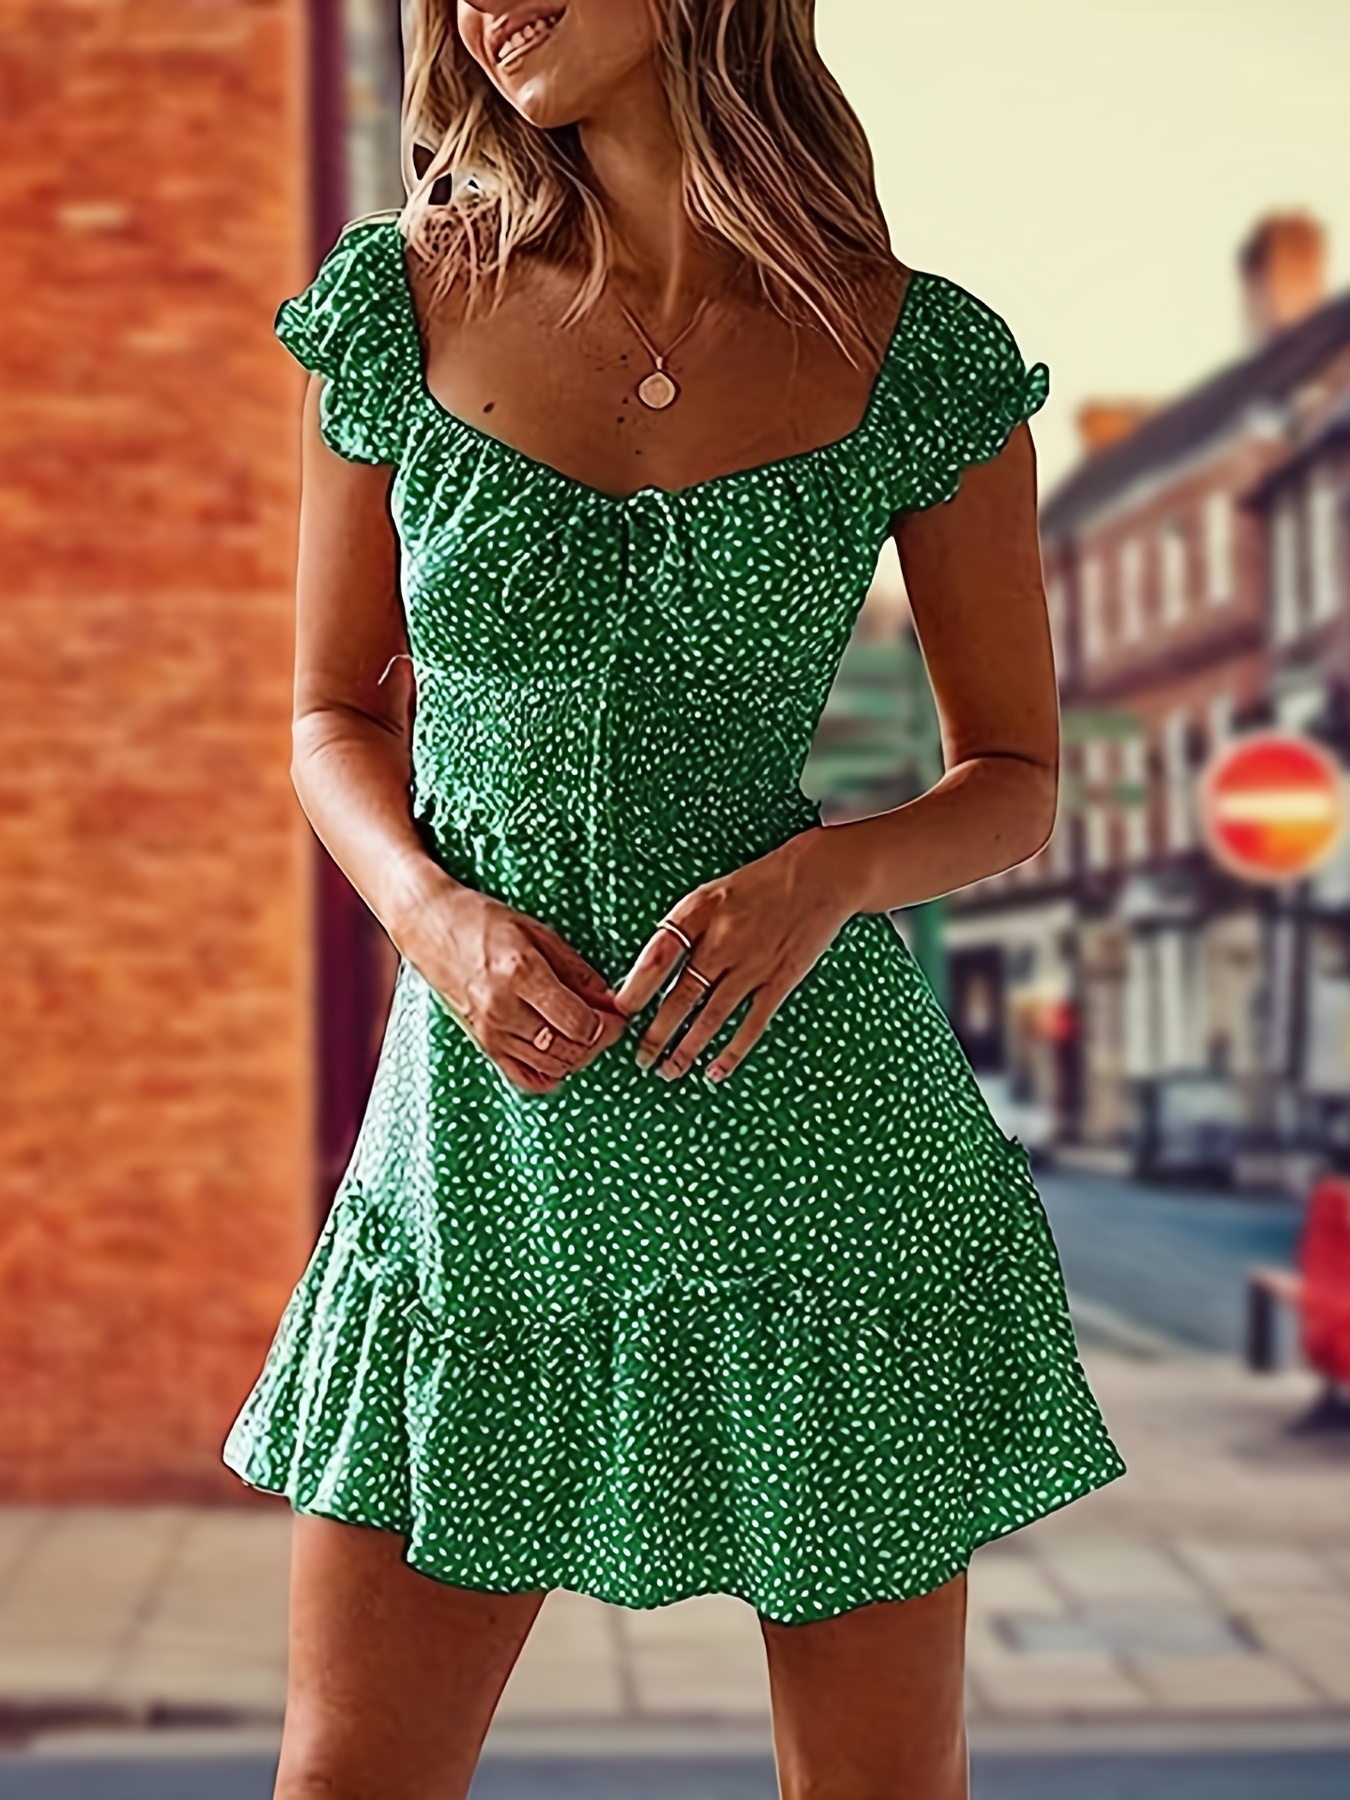 Spring Dresses For Women 2023, Spring Dresses, Vestidos Largos Casuales  Para Mujer, Dress With Shorts Underneath, Swing Dress, Resort Wear For  Women